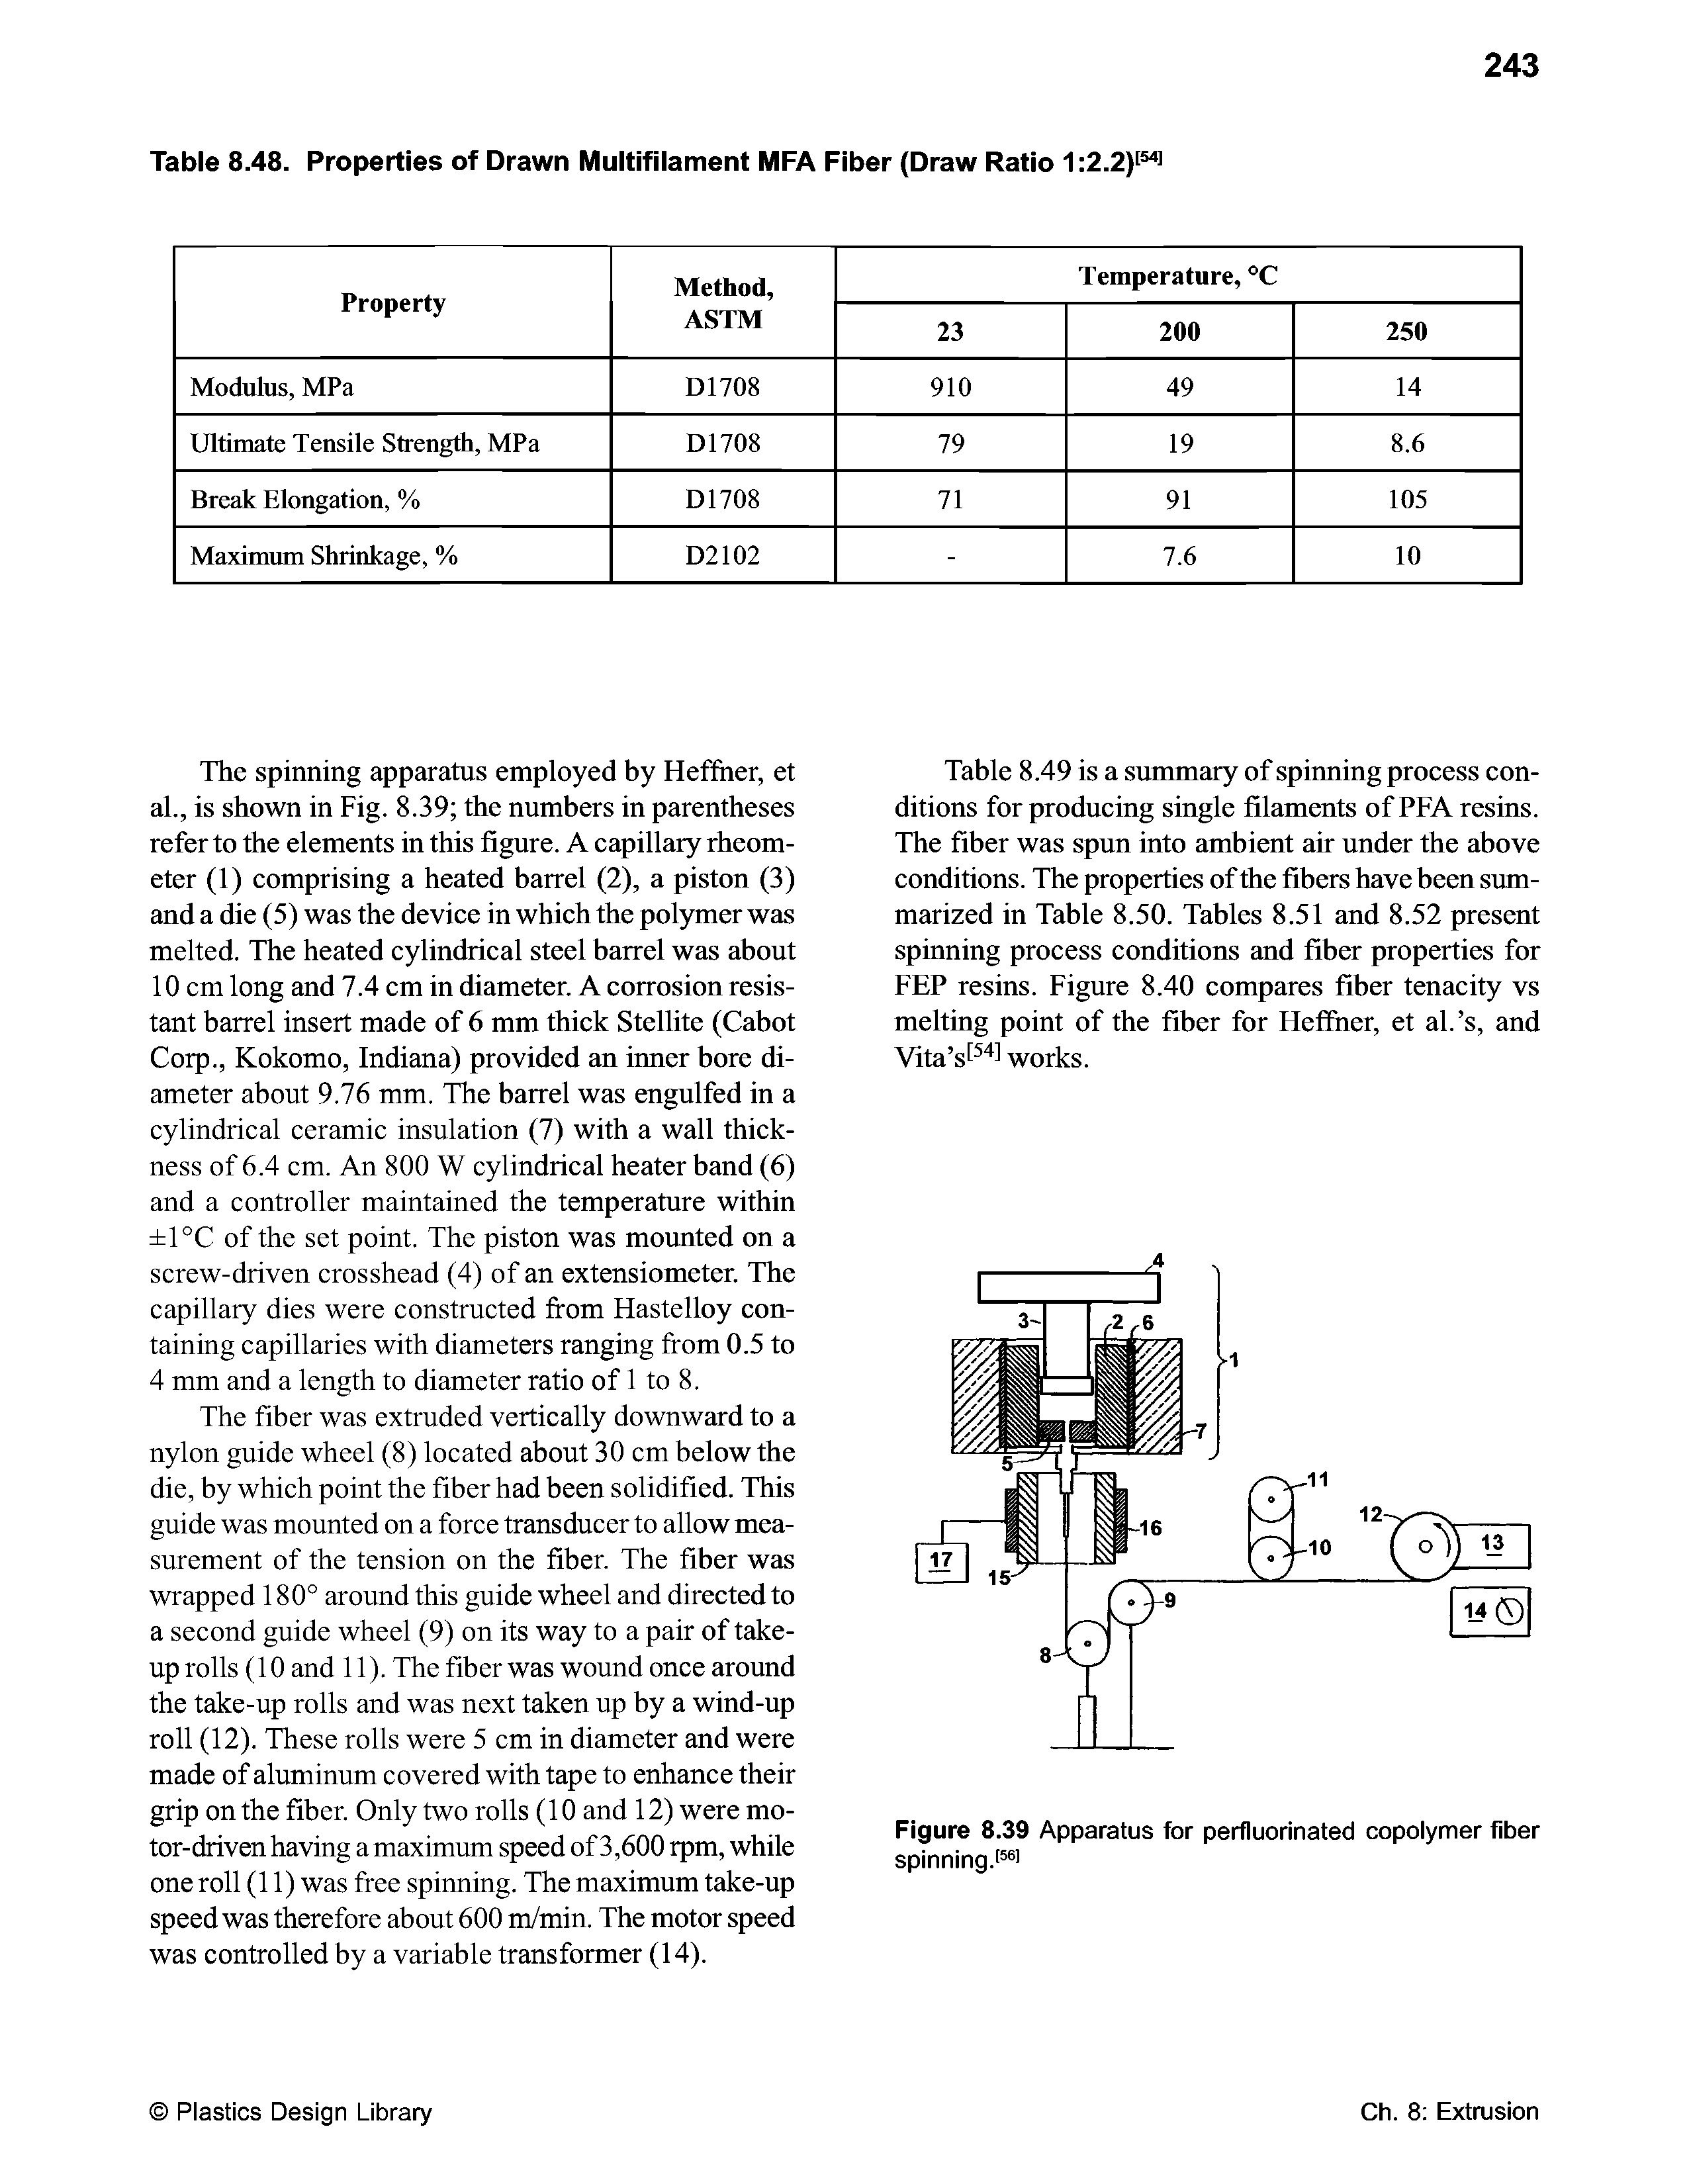 Table 8.49 is a smnmary of spinning process conditions for producing single filaments of PEA resins. The fiber was spun into ambient air under the above conditions. The properties of the fibers have been summarized in Table 8.50. Tables 8.51 and 8.52 present spinning process conditions and fiber properties for FEP resins. Figure 8.40 compares fiber tenacity vs melting point of the fiber for Heffher, et al. s, and Vita sf " ] works.